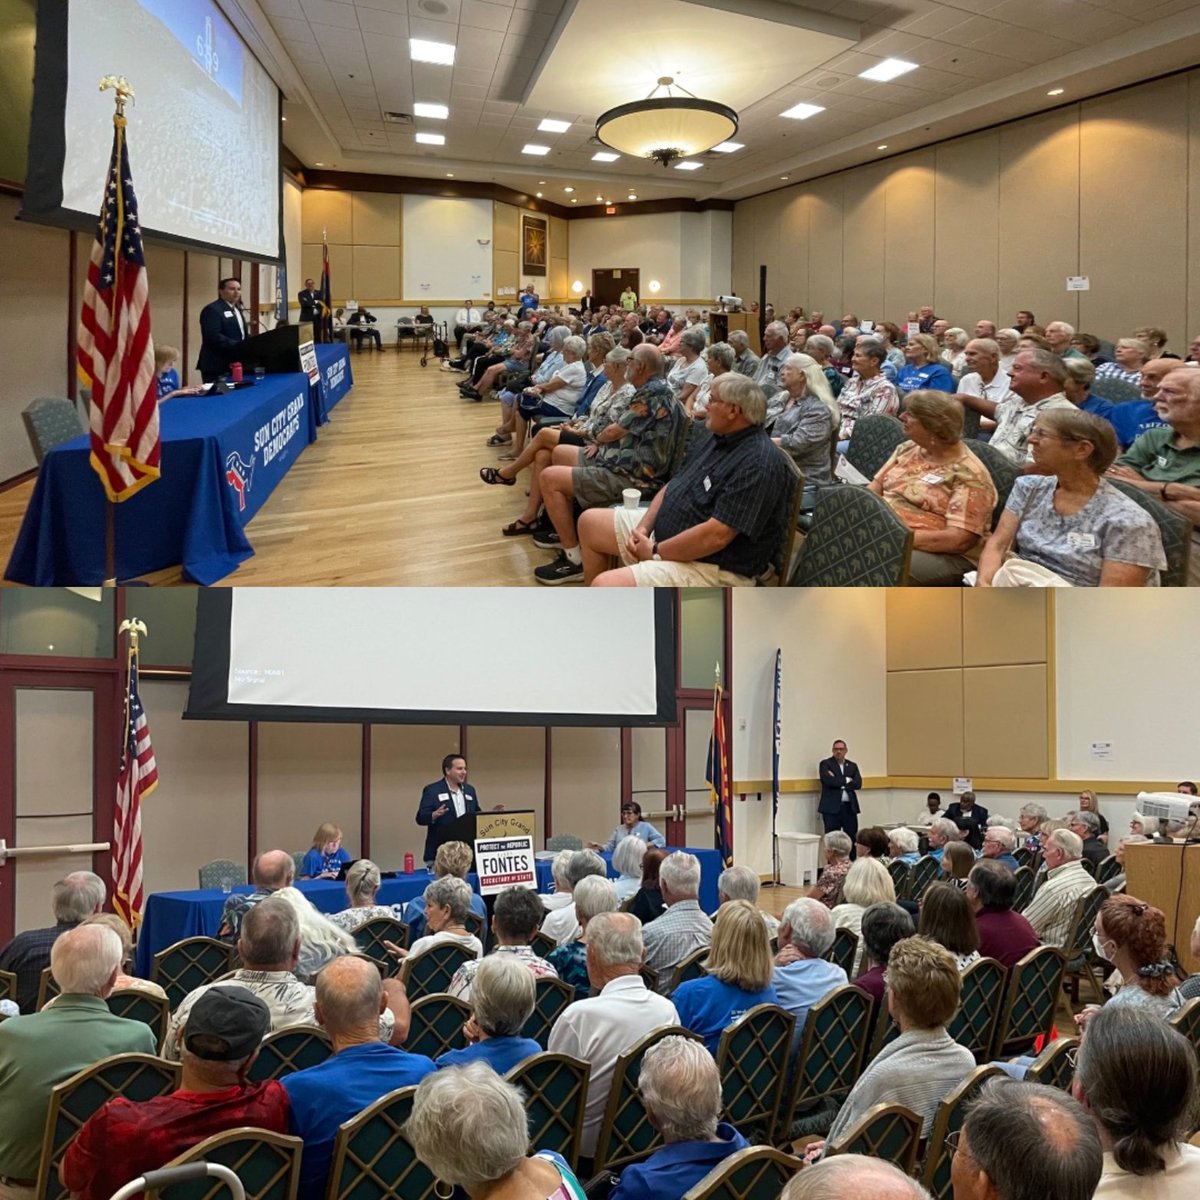 Thank you Sun City Dems! Grateful for the opportunity to be back speaking to this group. Great to meet all the dedicated candidates and activists working hard. Excited for the possibilities ahead of us!